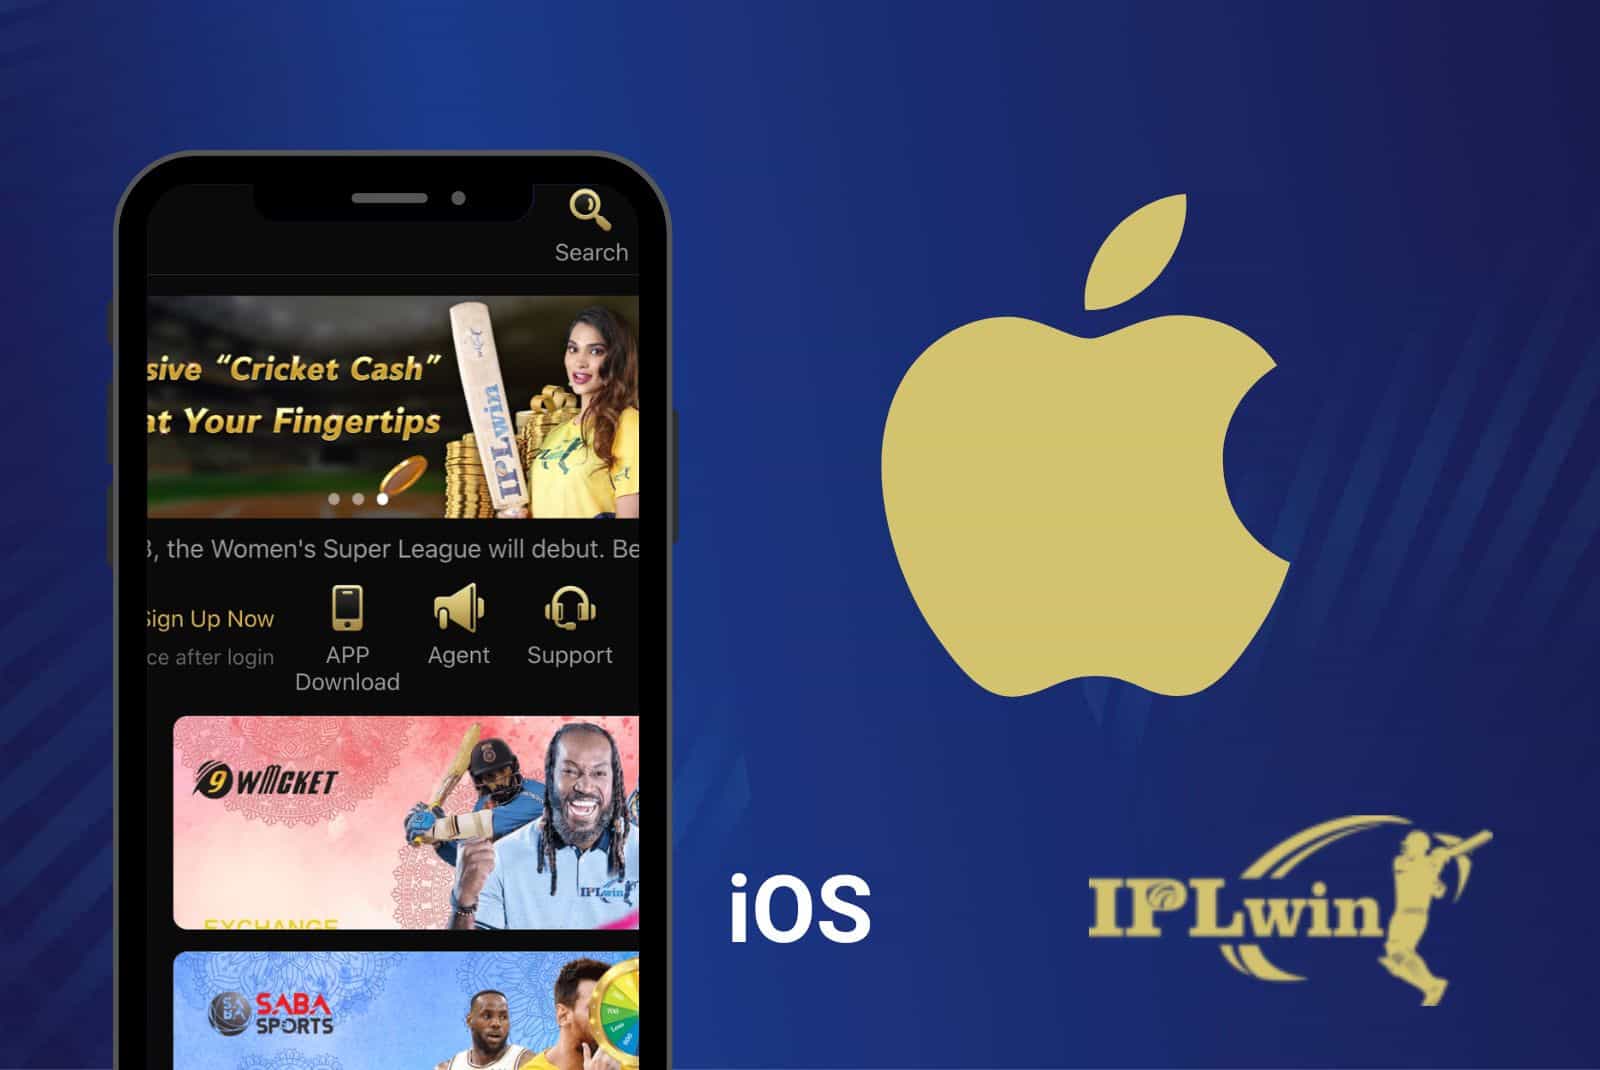 IPLwin app for iOS devices downloading and installation guide for players from India